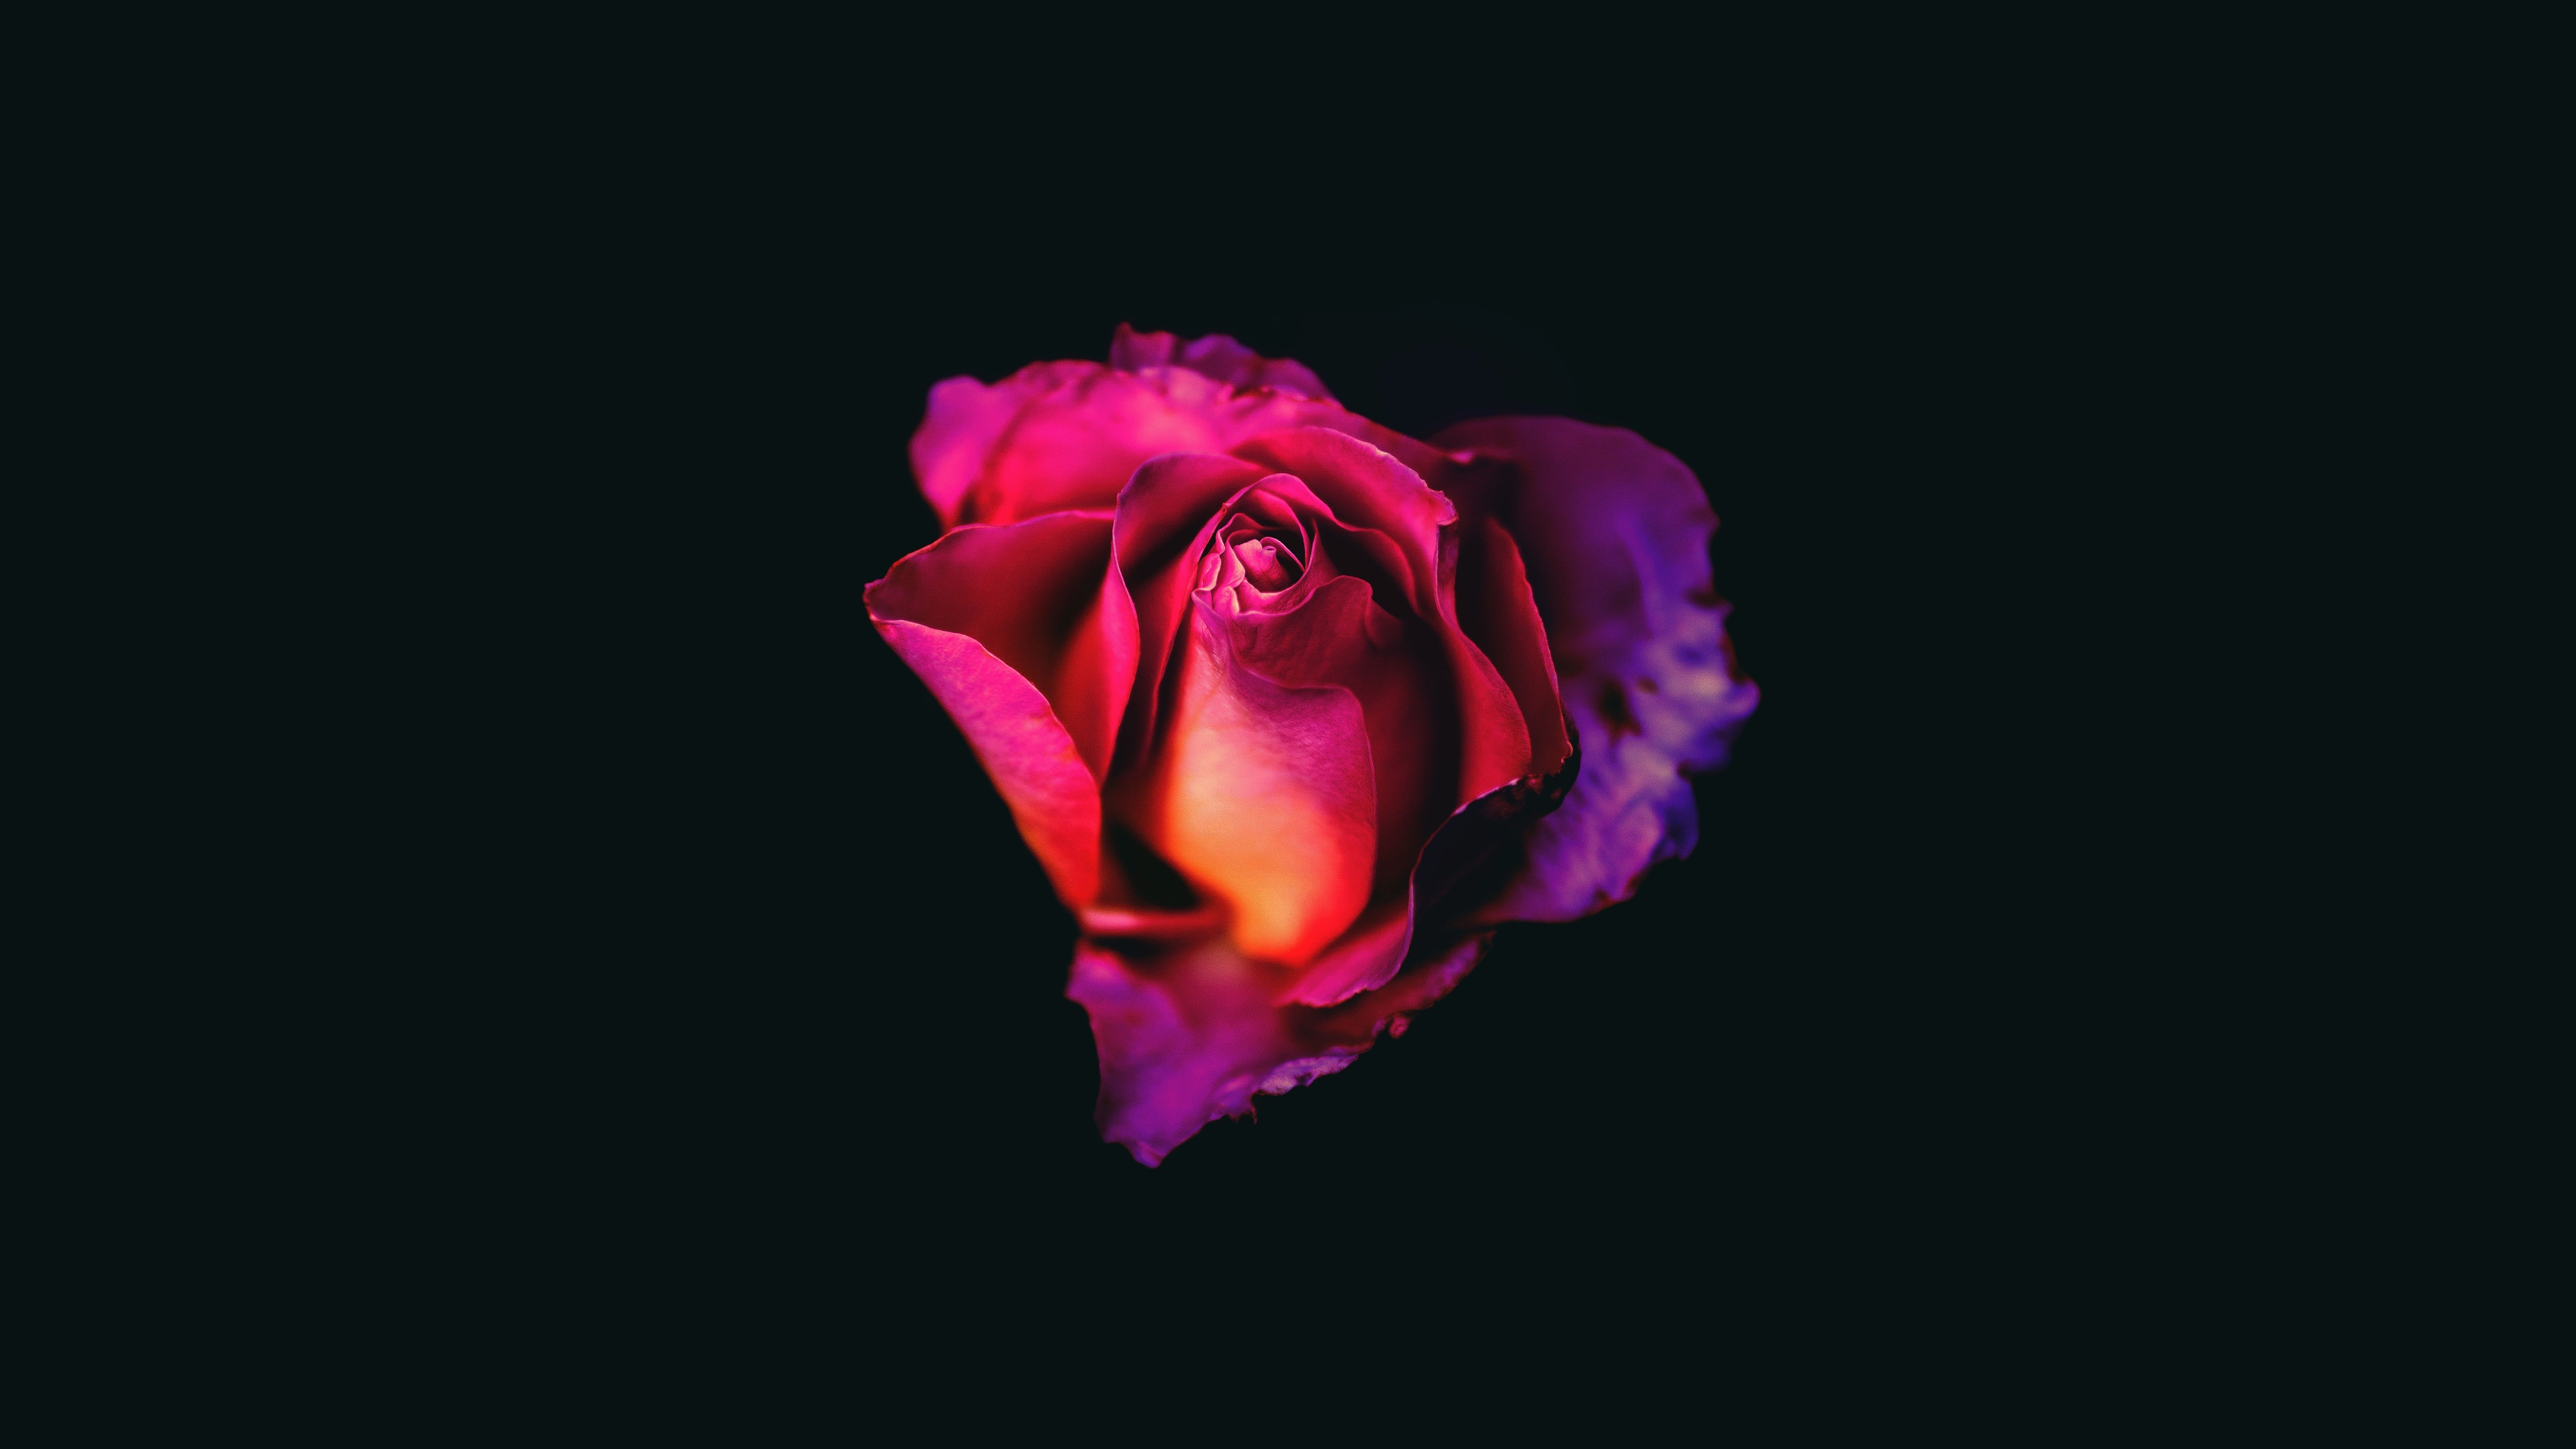 Rose Oled Dark 8k 8k HD 4k Wallpaper, Image, Background, Photo and Picture